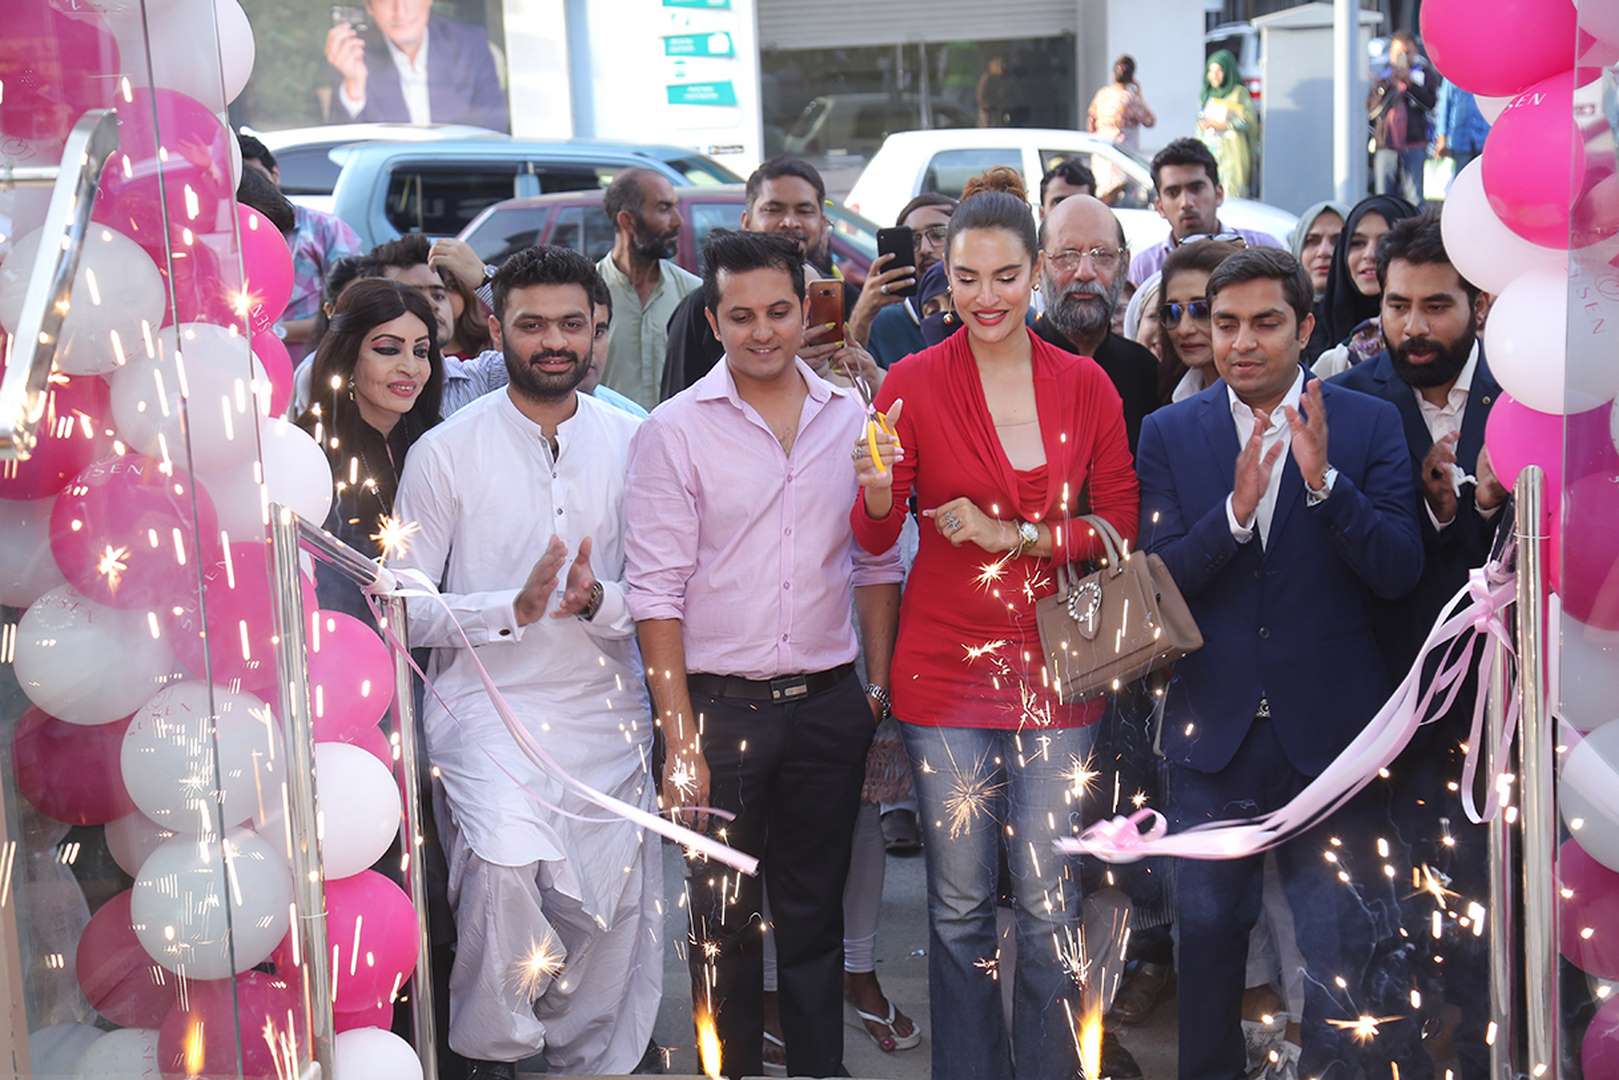 The opening was marked by a ribbon-cutting ceremony by the glamorous Nadia Hussain